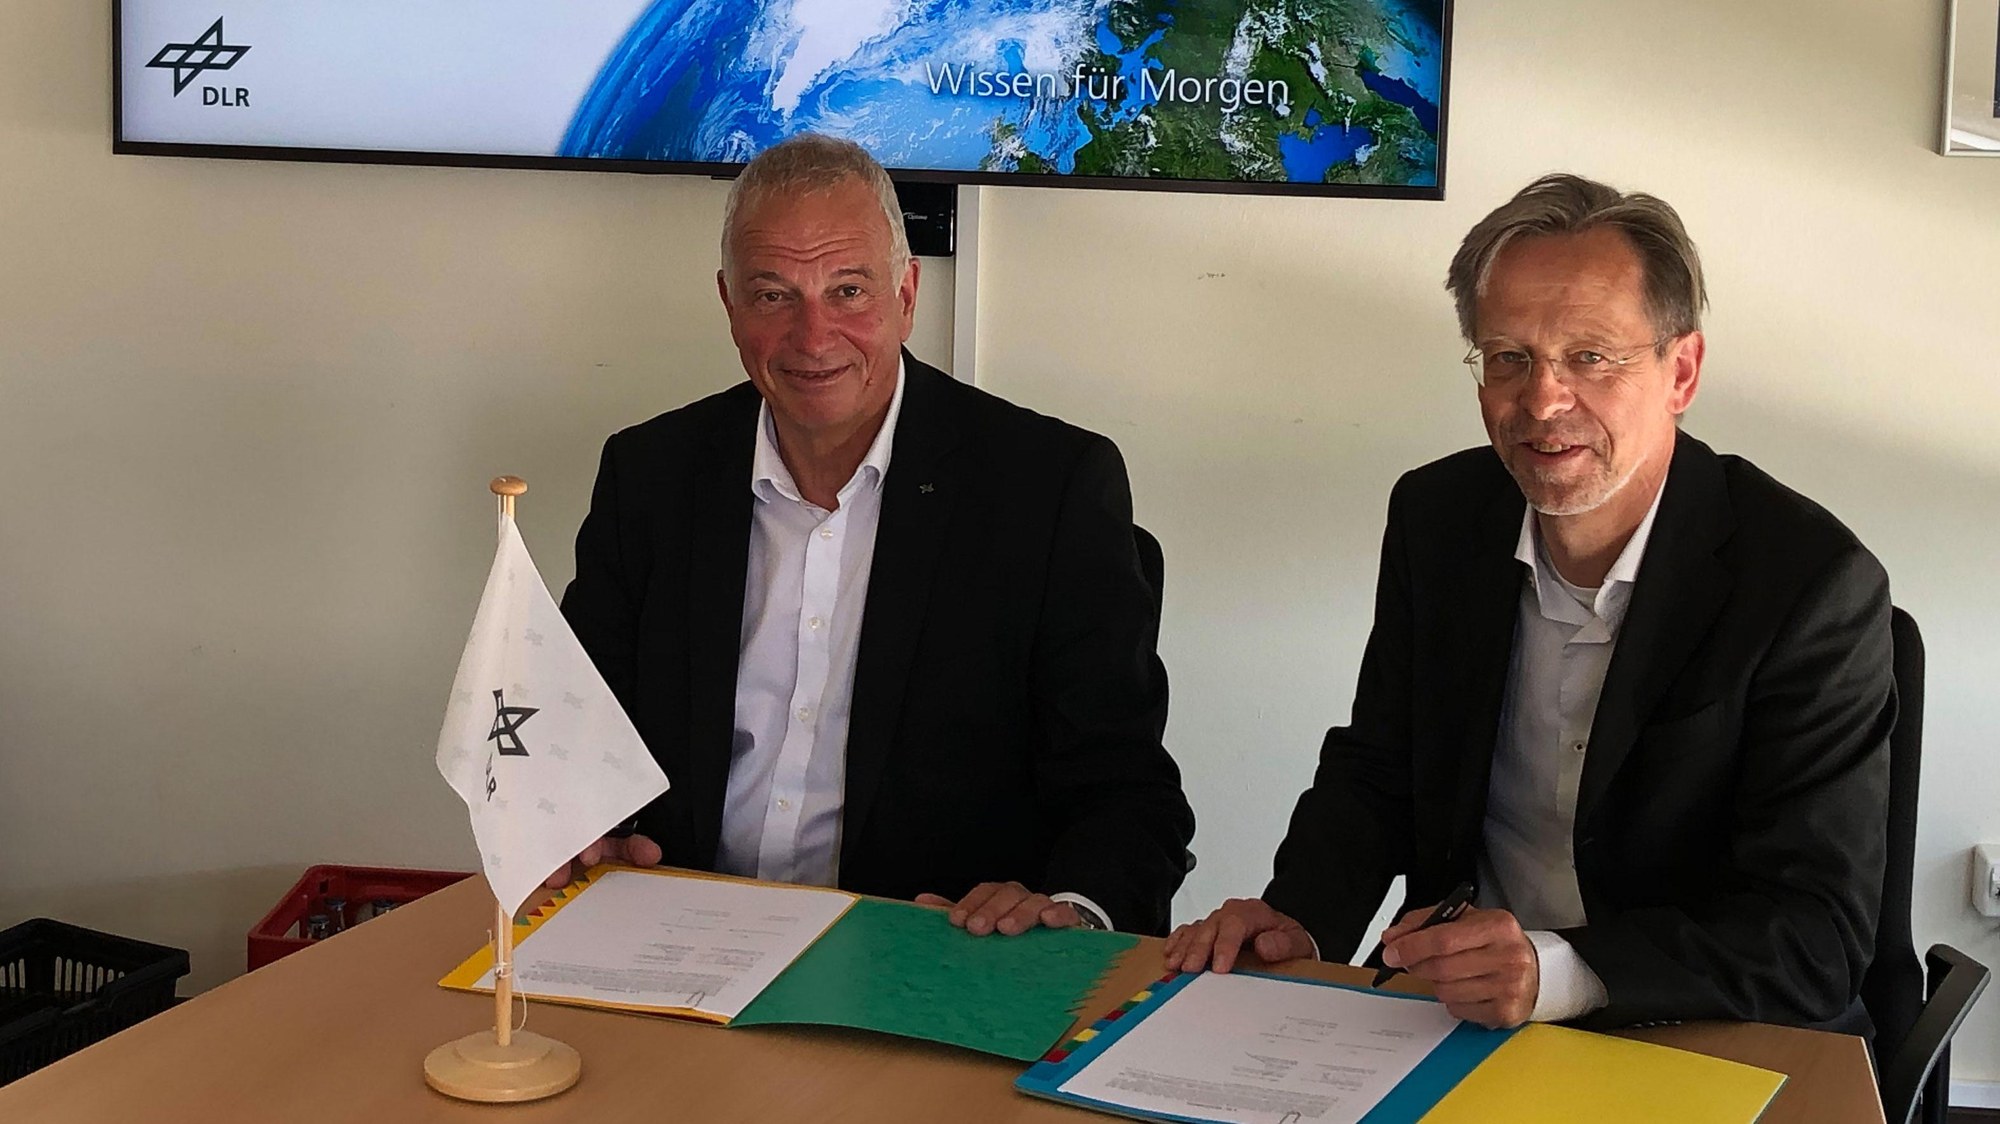 Bernd Knabe (right), Lufthansa Consulting GmbH, and Rolf-Dieter Fischer (left), DLR Technology Marketing, at the signing of the strategic innovation partnership.